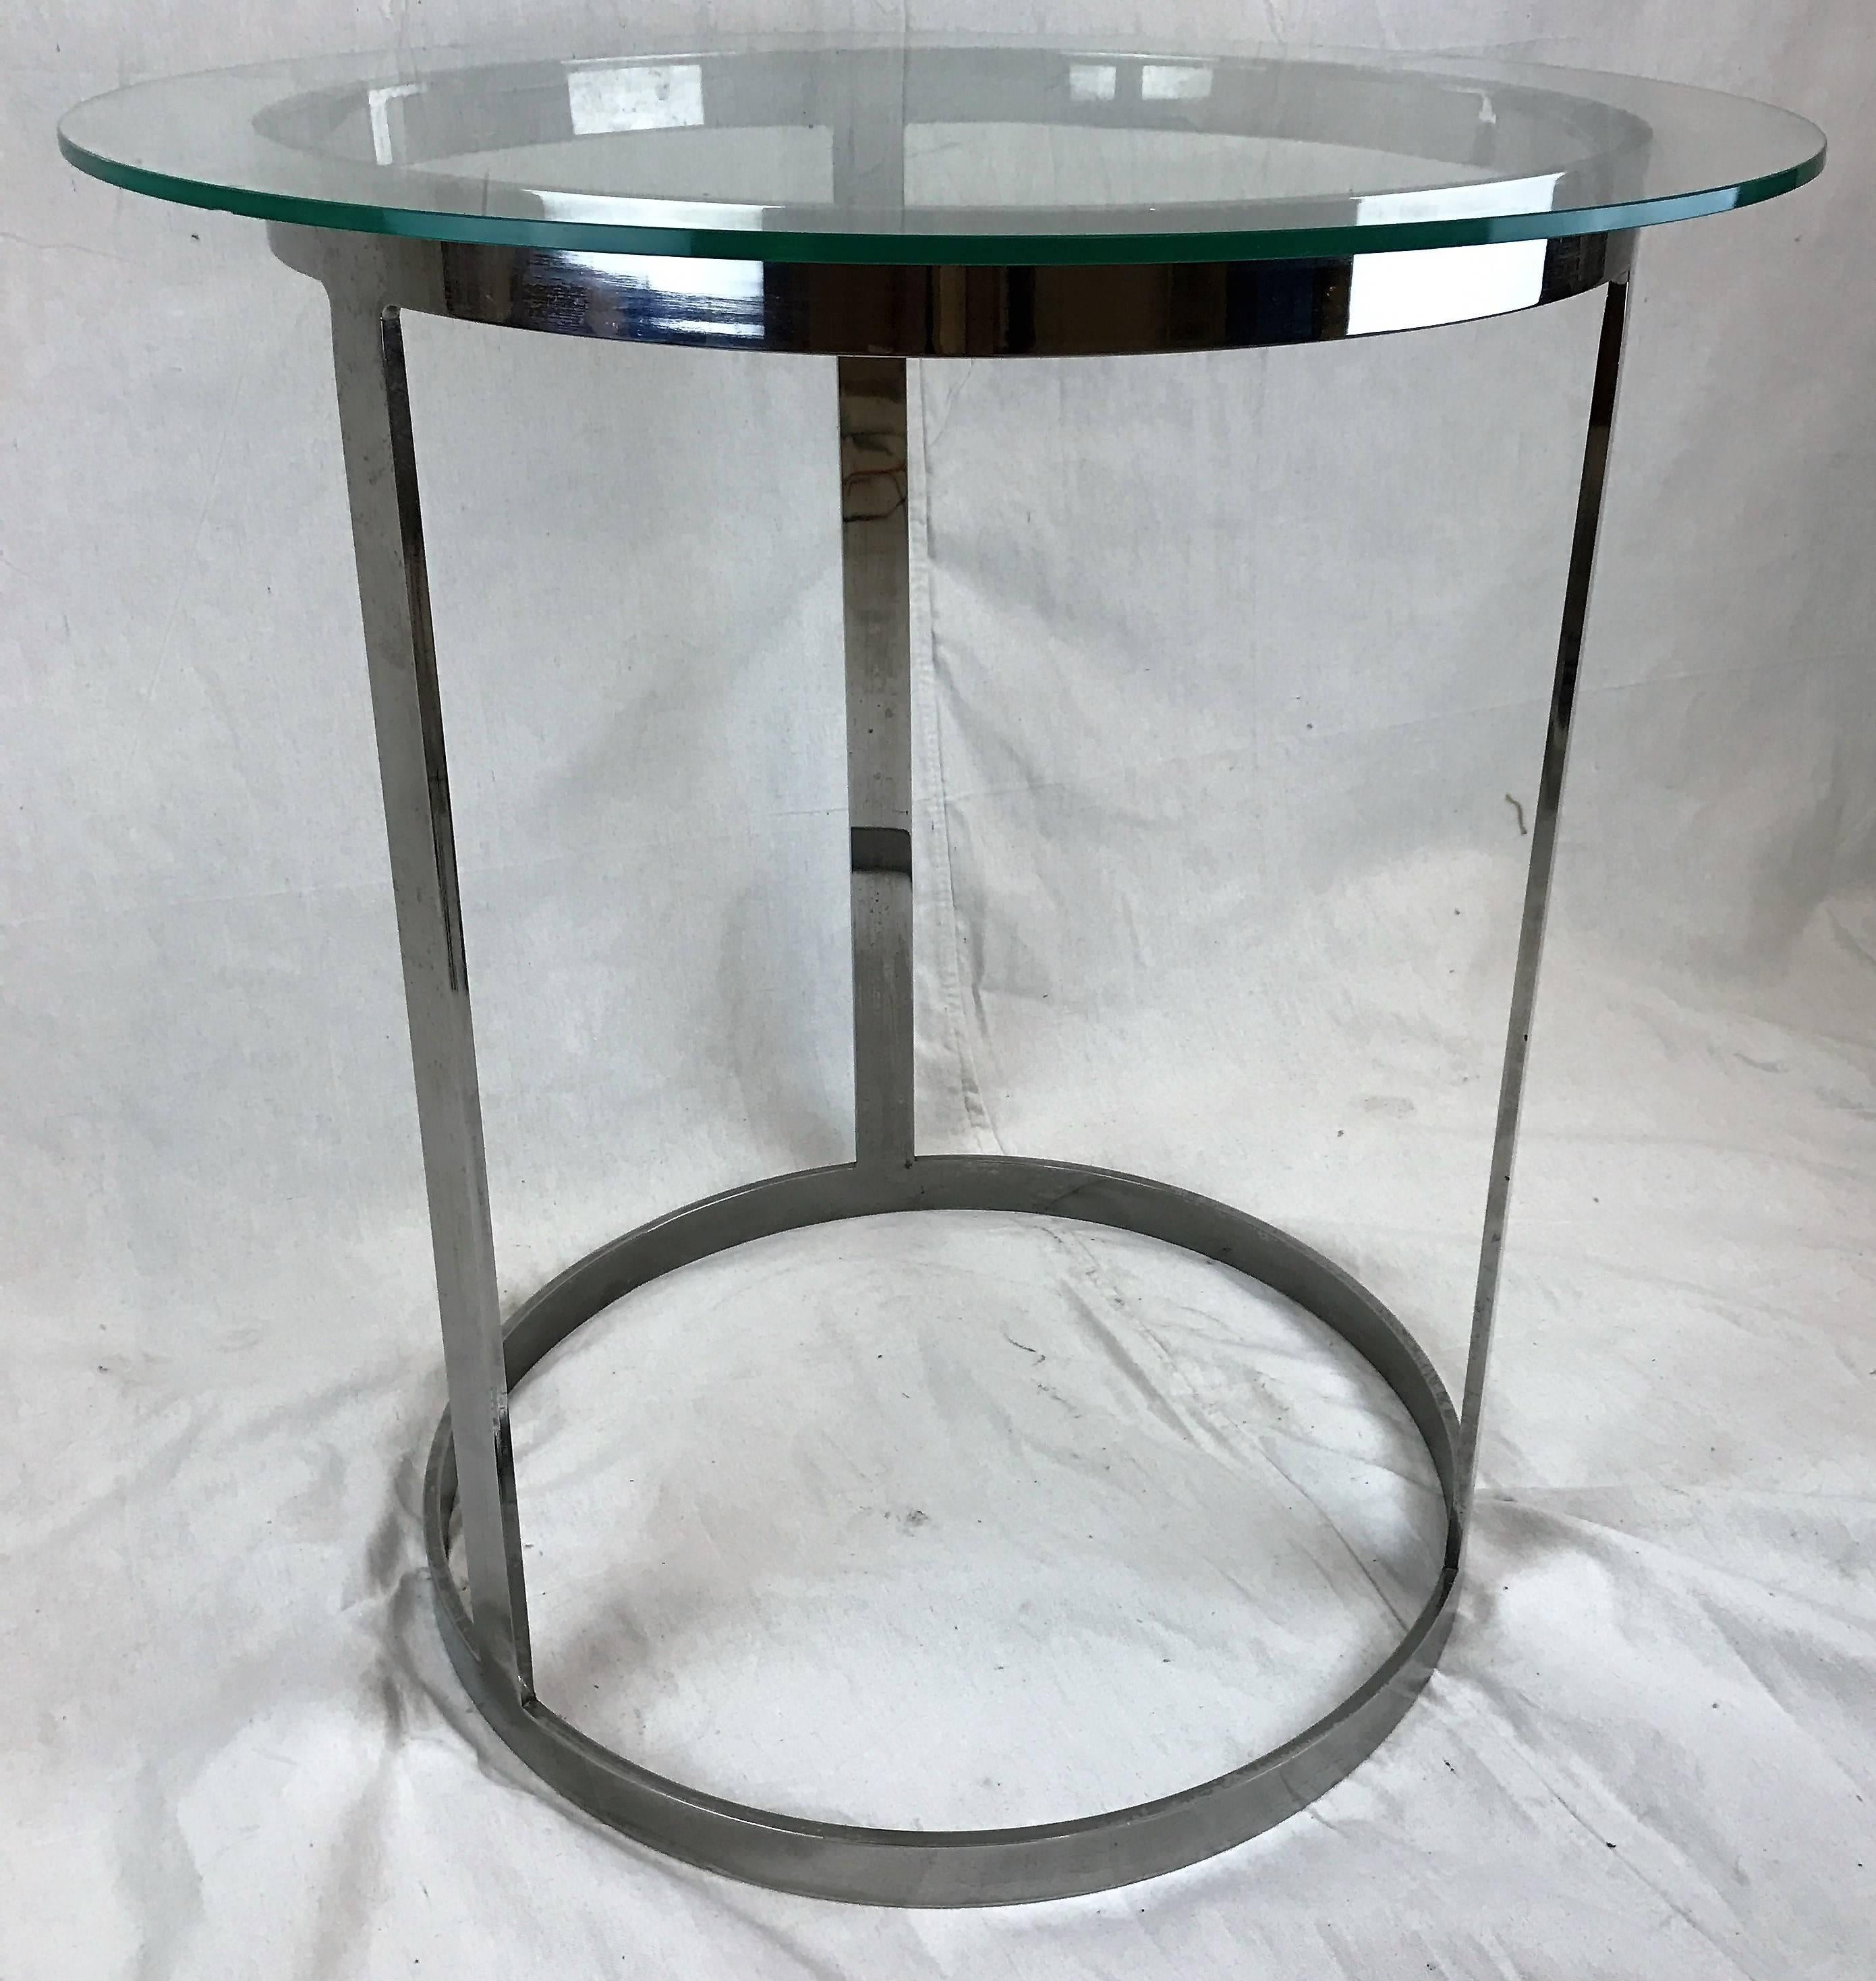 Stunning round glass and chrome occasional table designed by Milo Baughman. Constructed of a highly polished chrome tubular frame with 3/8 inch; removable glass top.